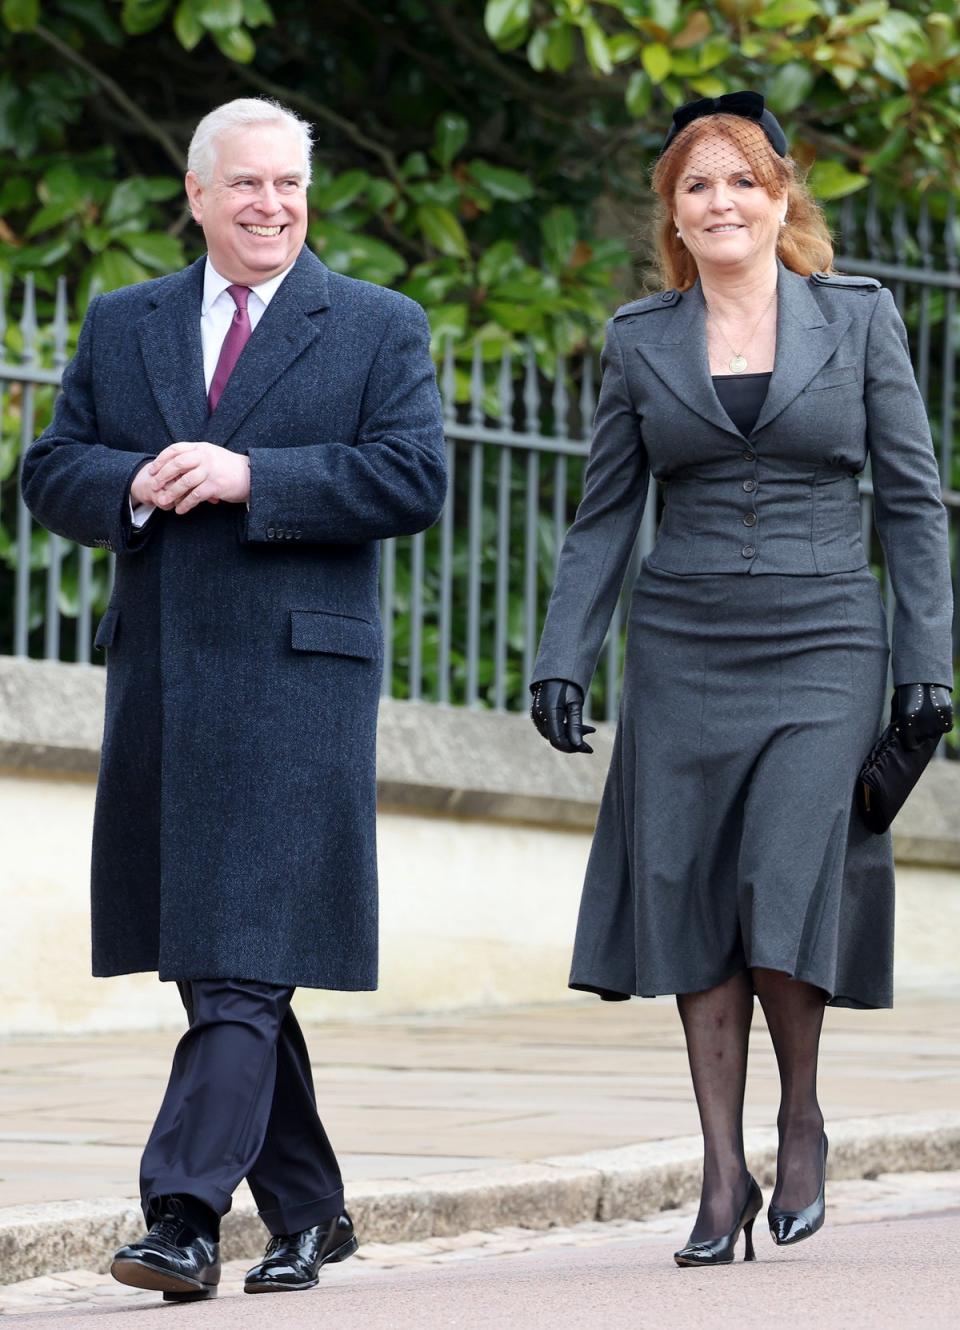 Prince Andrew alongside his ex-wife Sarah Ferguson who was diagnosed with malignant melanoma, a form of skin cancer, this year (Getty)